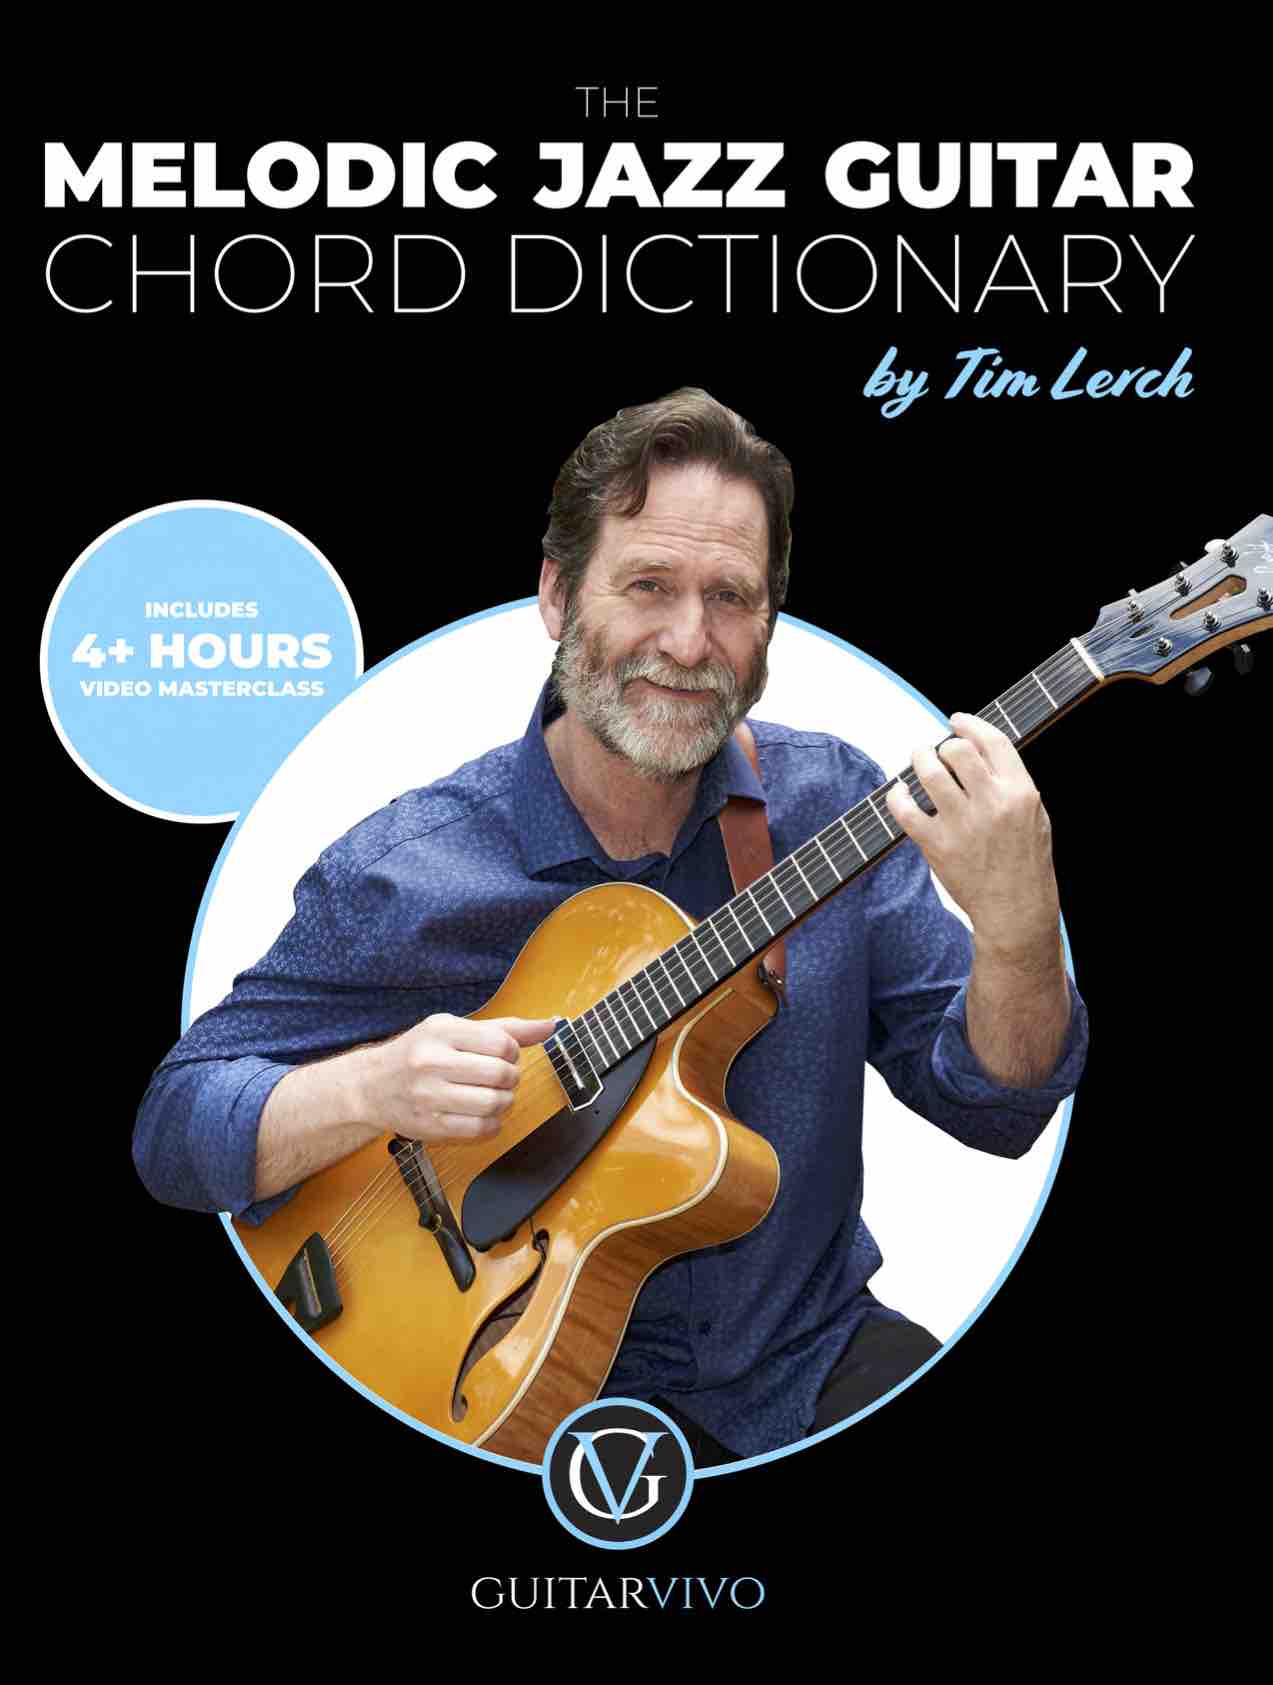 https://azsamadlessons.com/wp-content/uploads/2022/06/Tim-Lerch-The-Melodic-Jazz-Guitar-Chord-Dictionary-lr-COVER.jpg